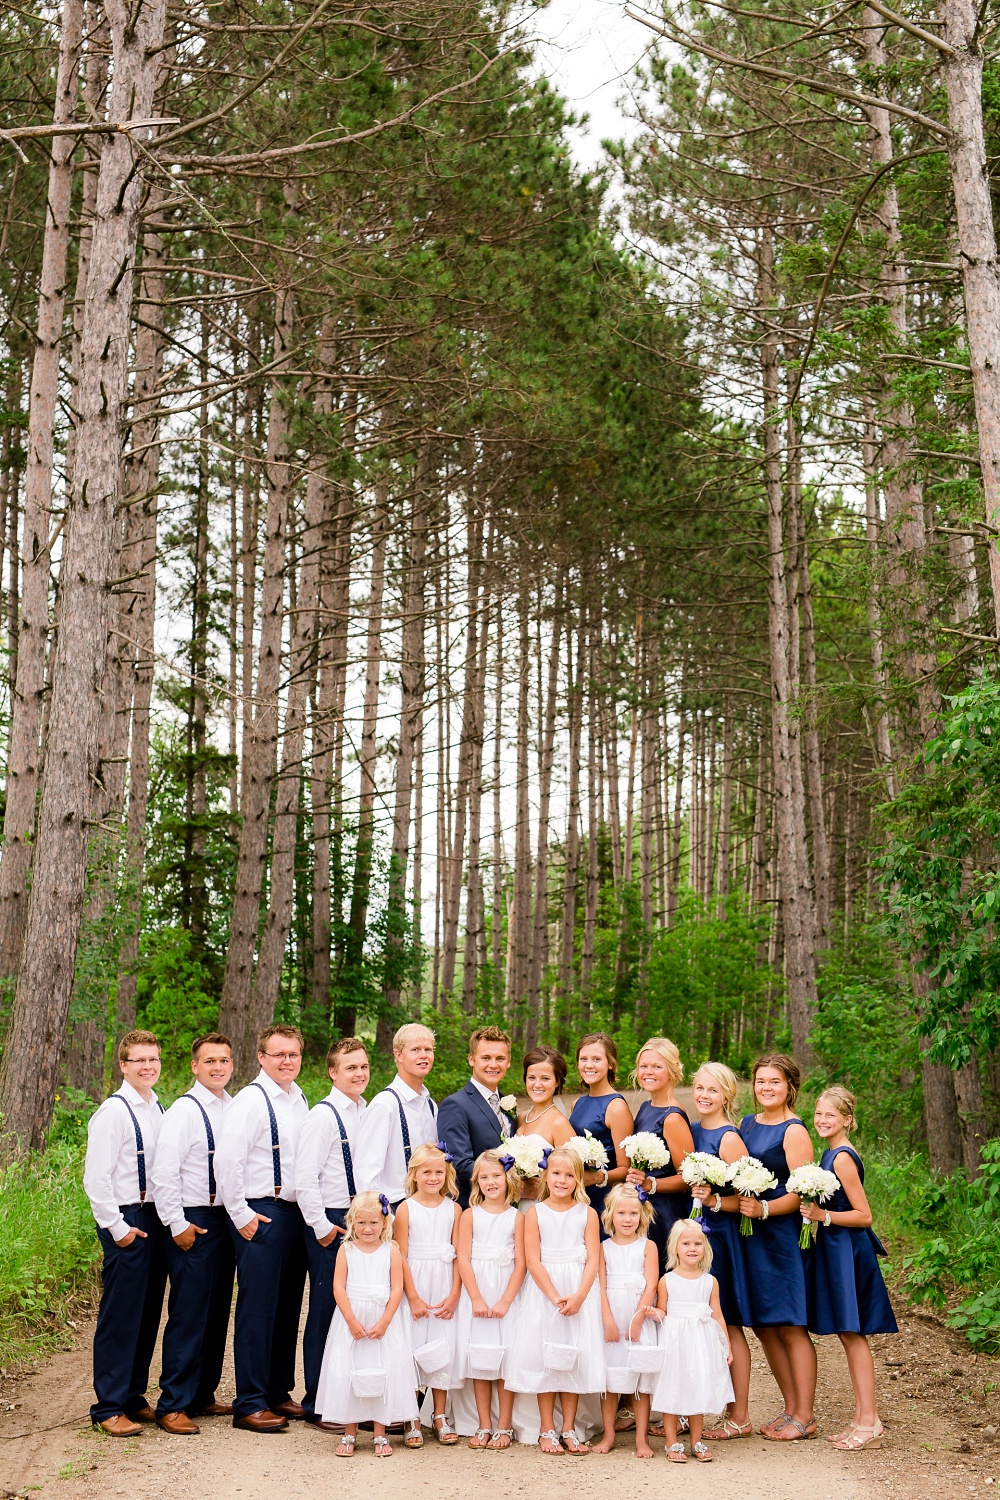 Wolf Lake, MN Country Styled Wedding, White Dress, Blue Suite | Photographed by Amber Langerud Photography | Bridal Party